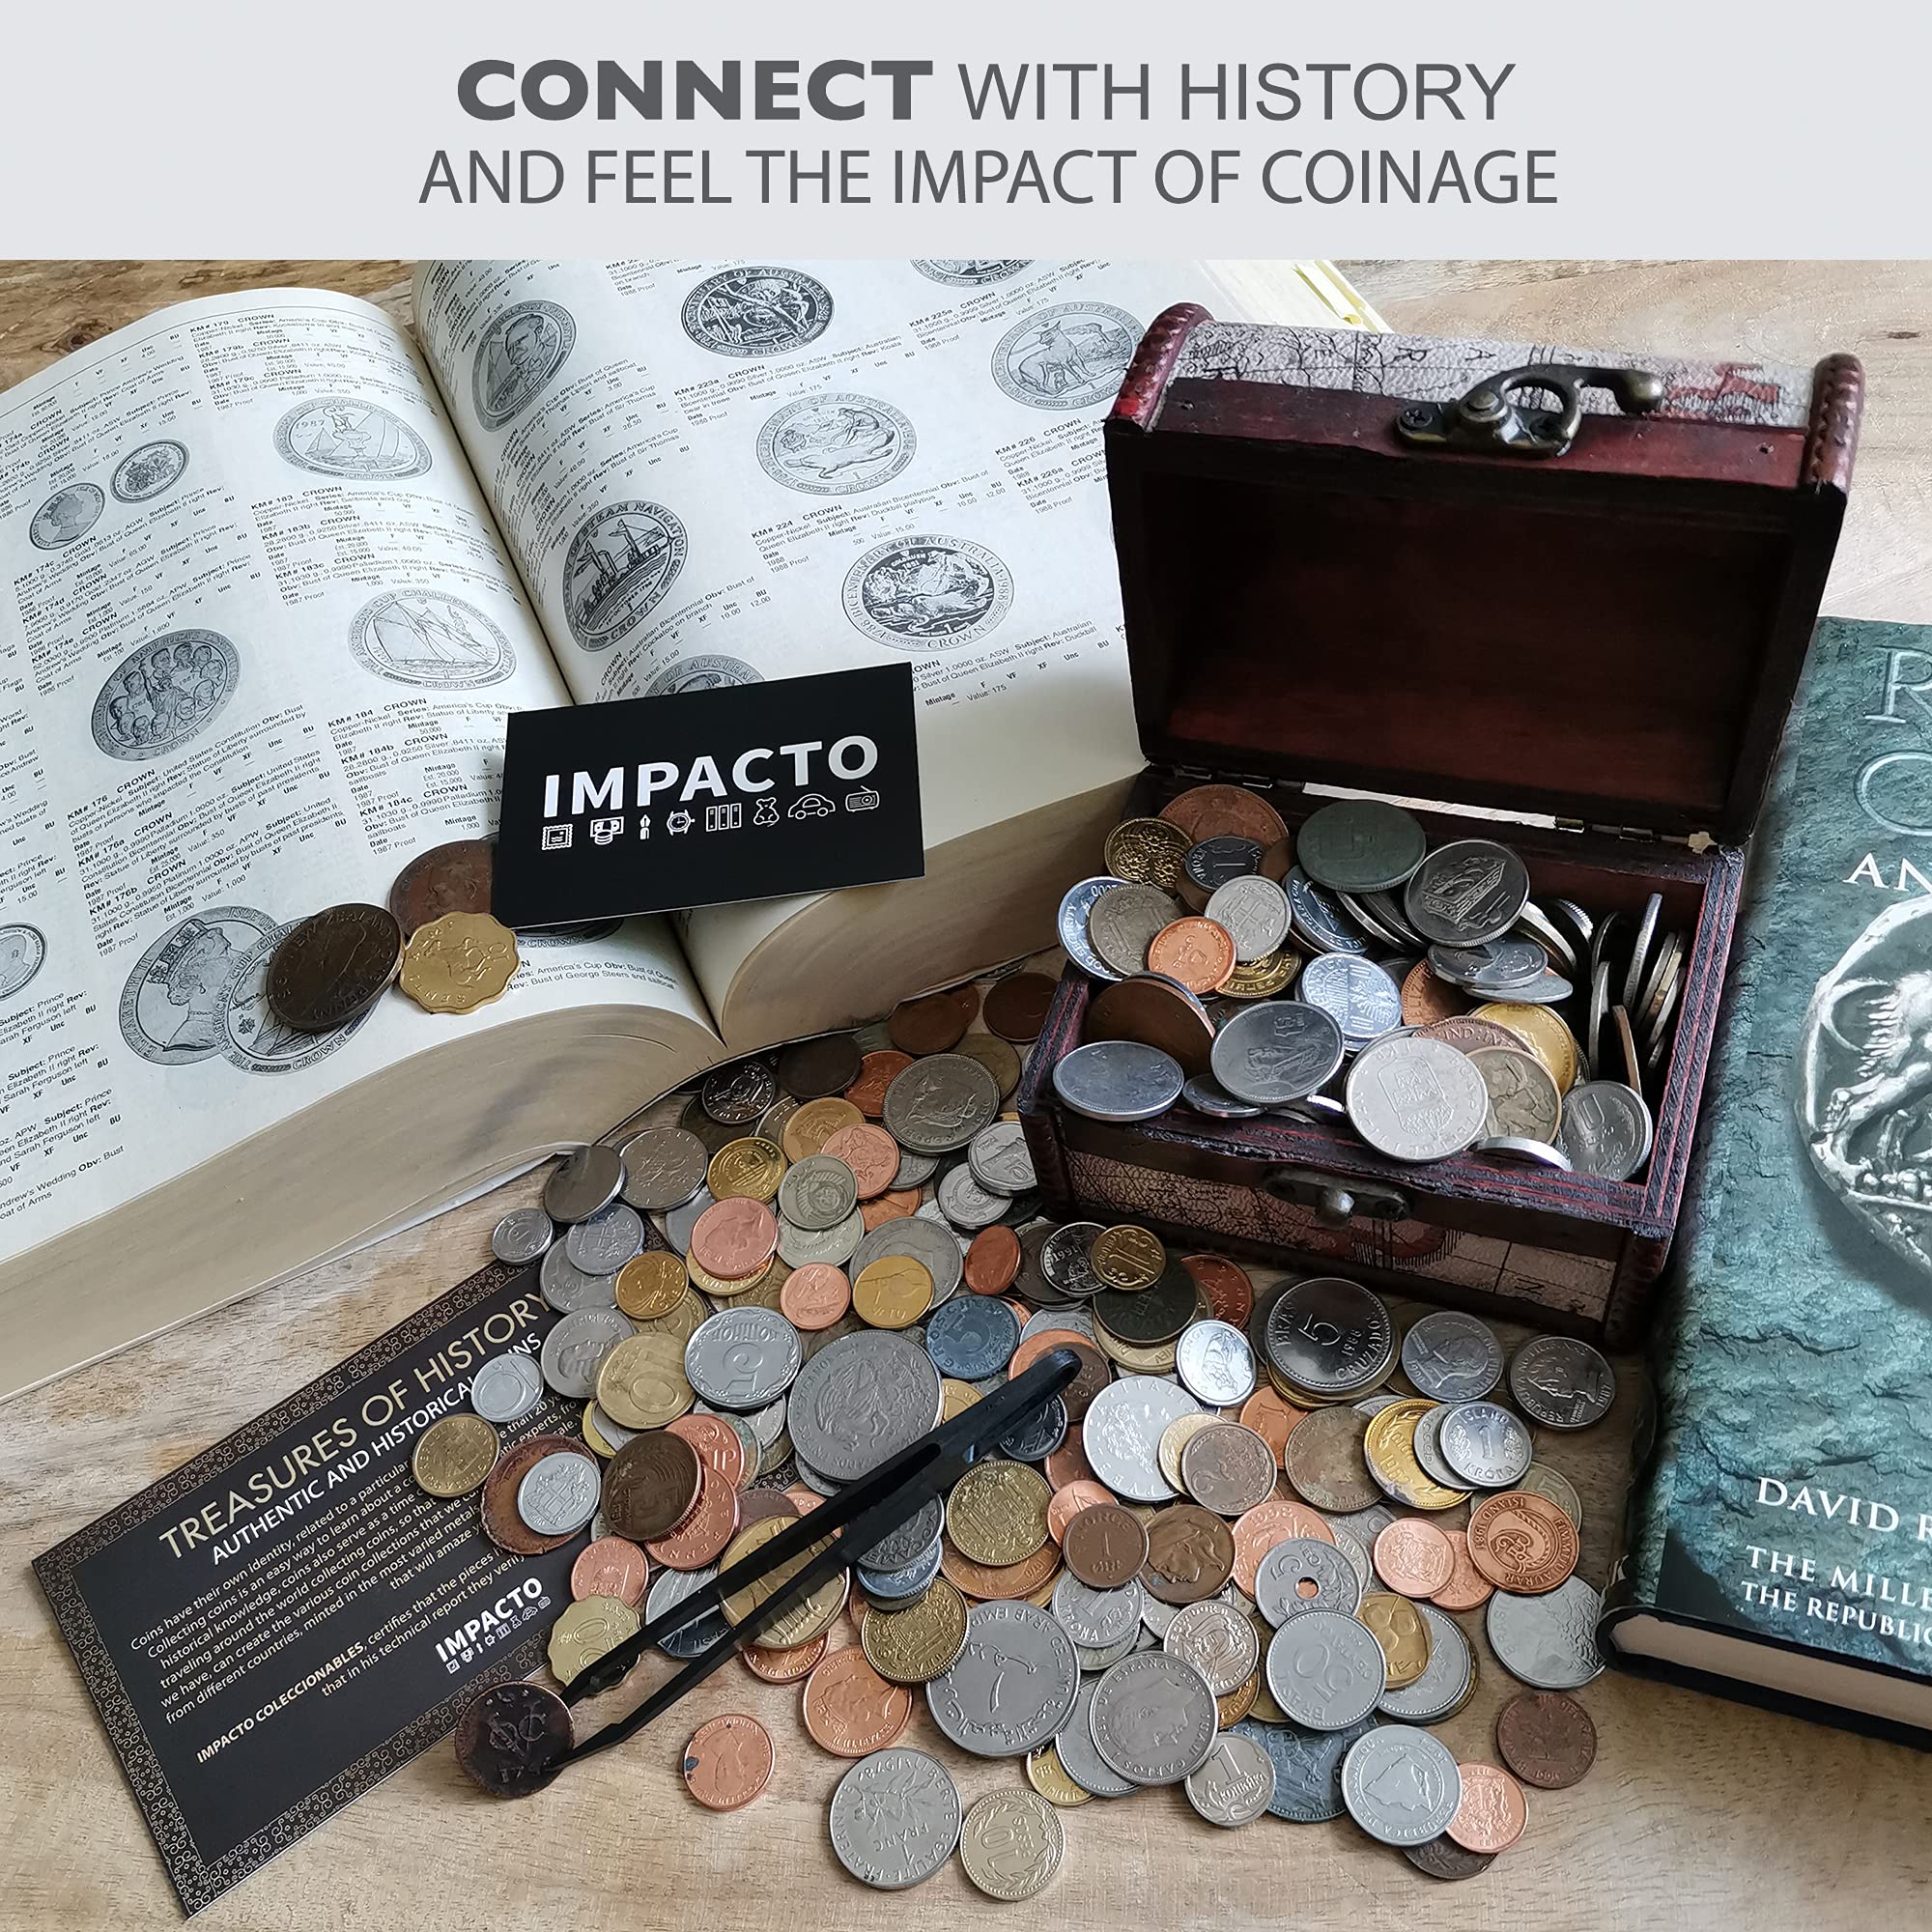 IMPACTO COLECCIONABLES Coin Collection - World Currency Treasure Chest with 2Lb. - Collectible Circulated Coins - 4.7 x 3.5 x 3.5 Decorative Wooden Box - Antique Coins for Collectors (COA Included)